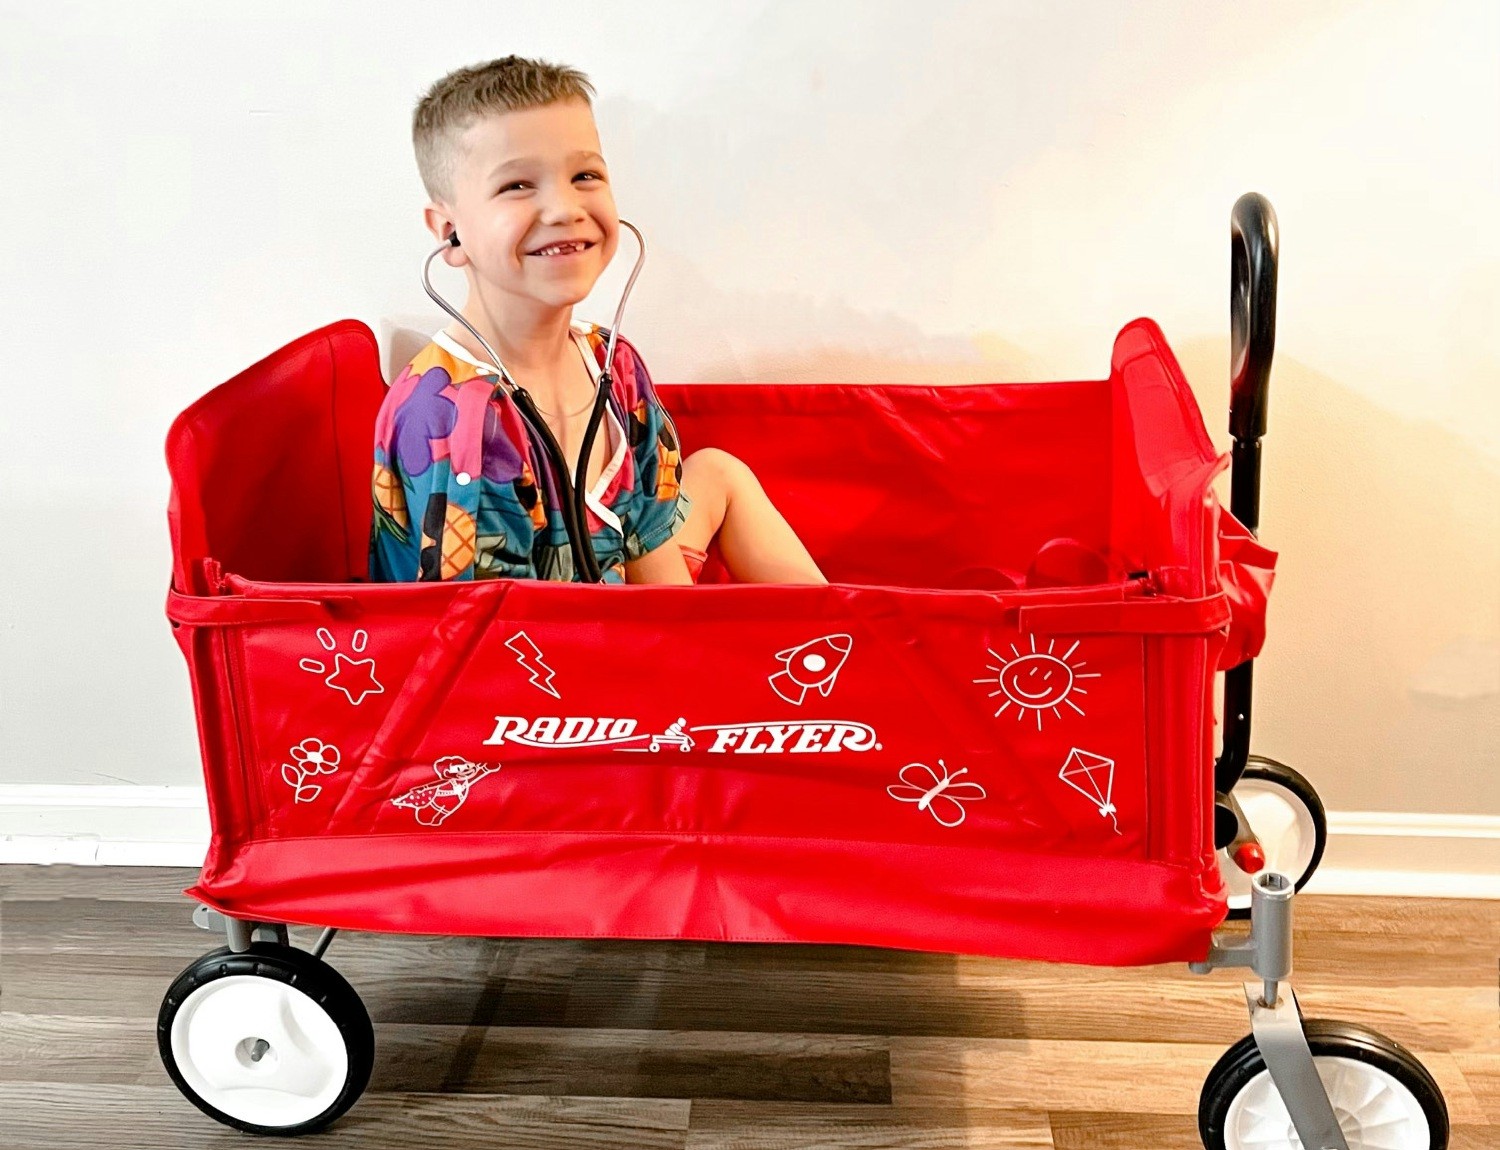 Radio Flyer donated over 1,000 Hero Wagons to Starlight, exclusively for hospital use to transport little adventurers.